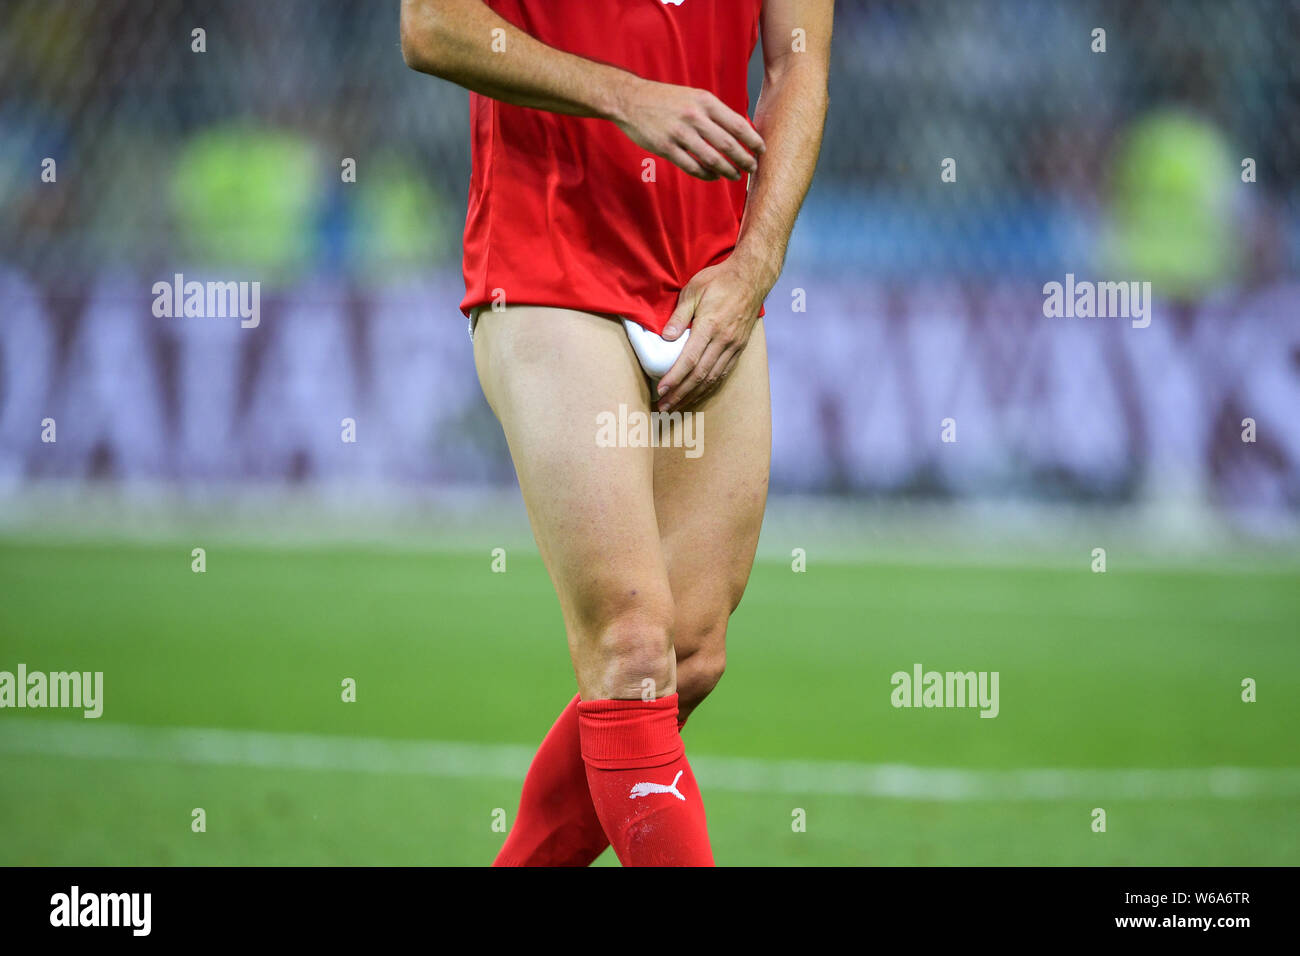 Antonio Rukavina of Serbia who lost his shorts walks towards the sideline after their Group E match against Brazil during the FIFA World Cup 2018 in M Stock Photo